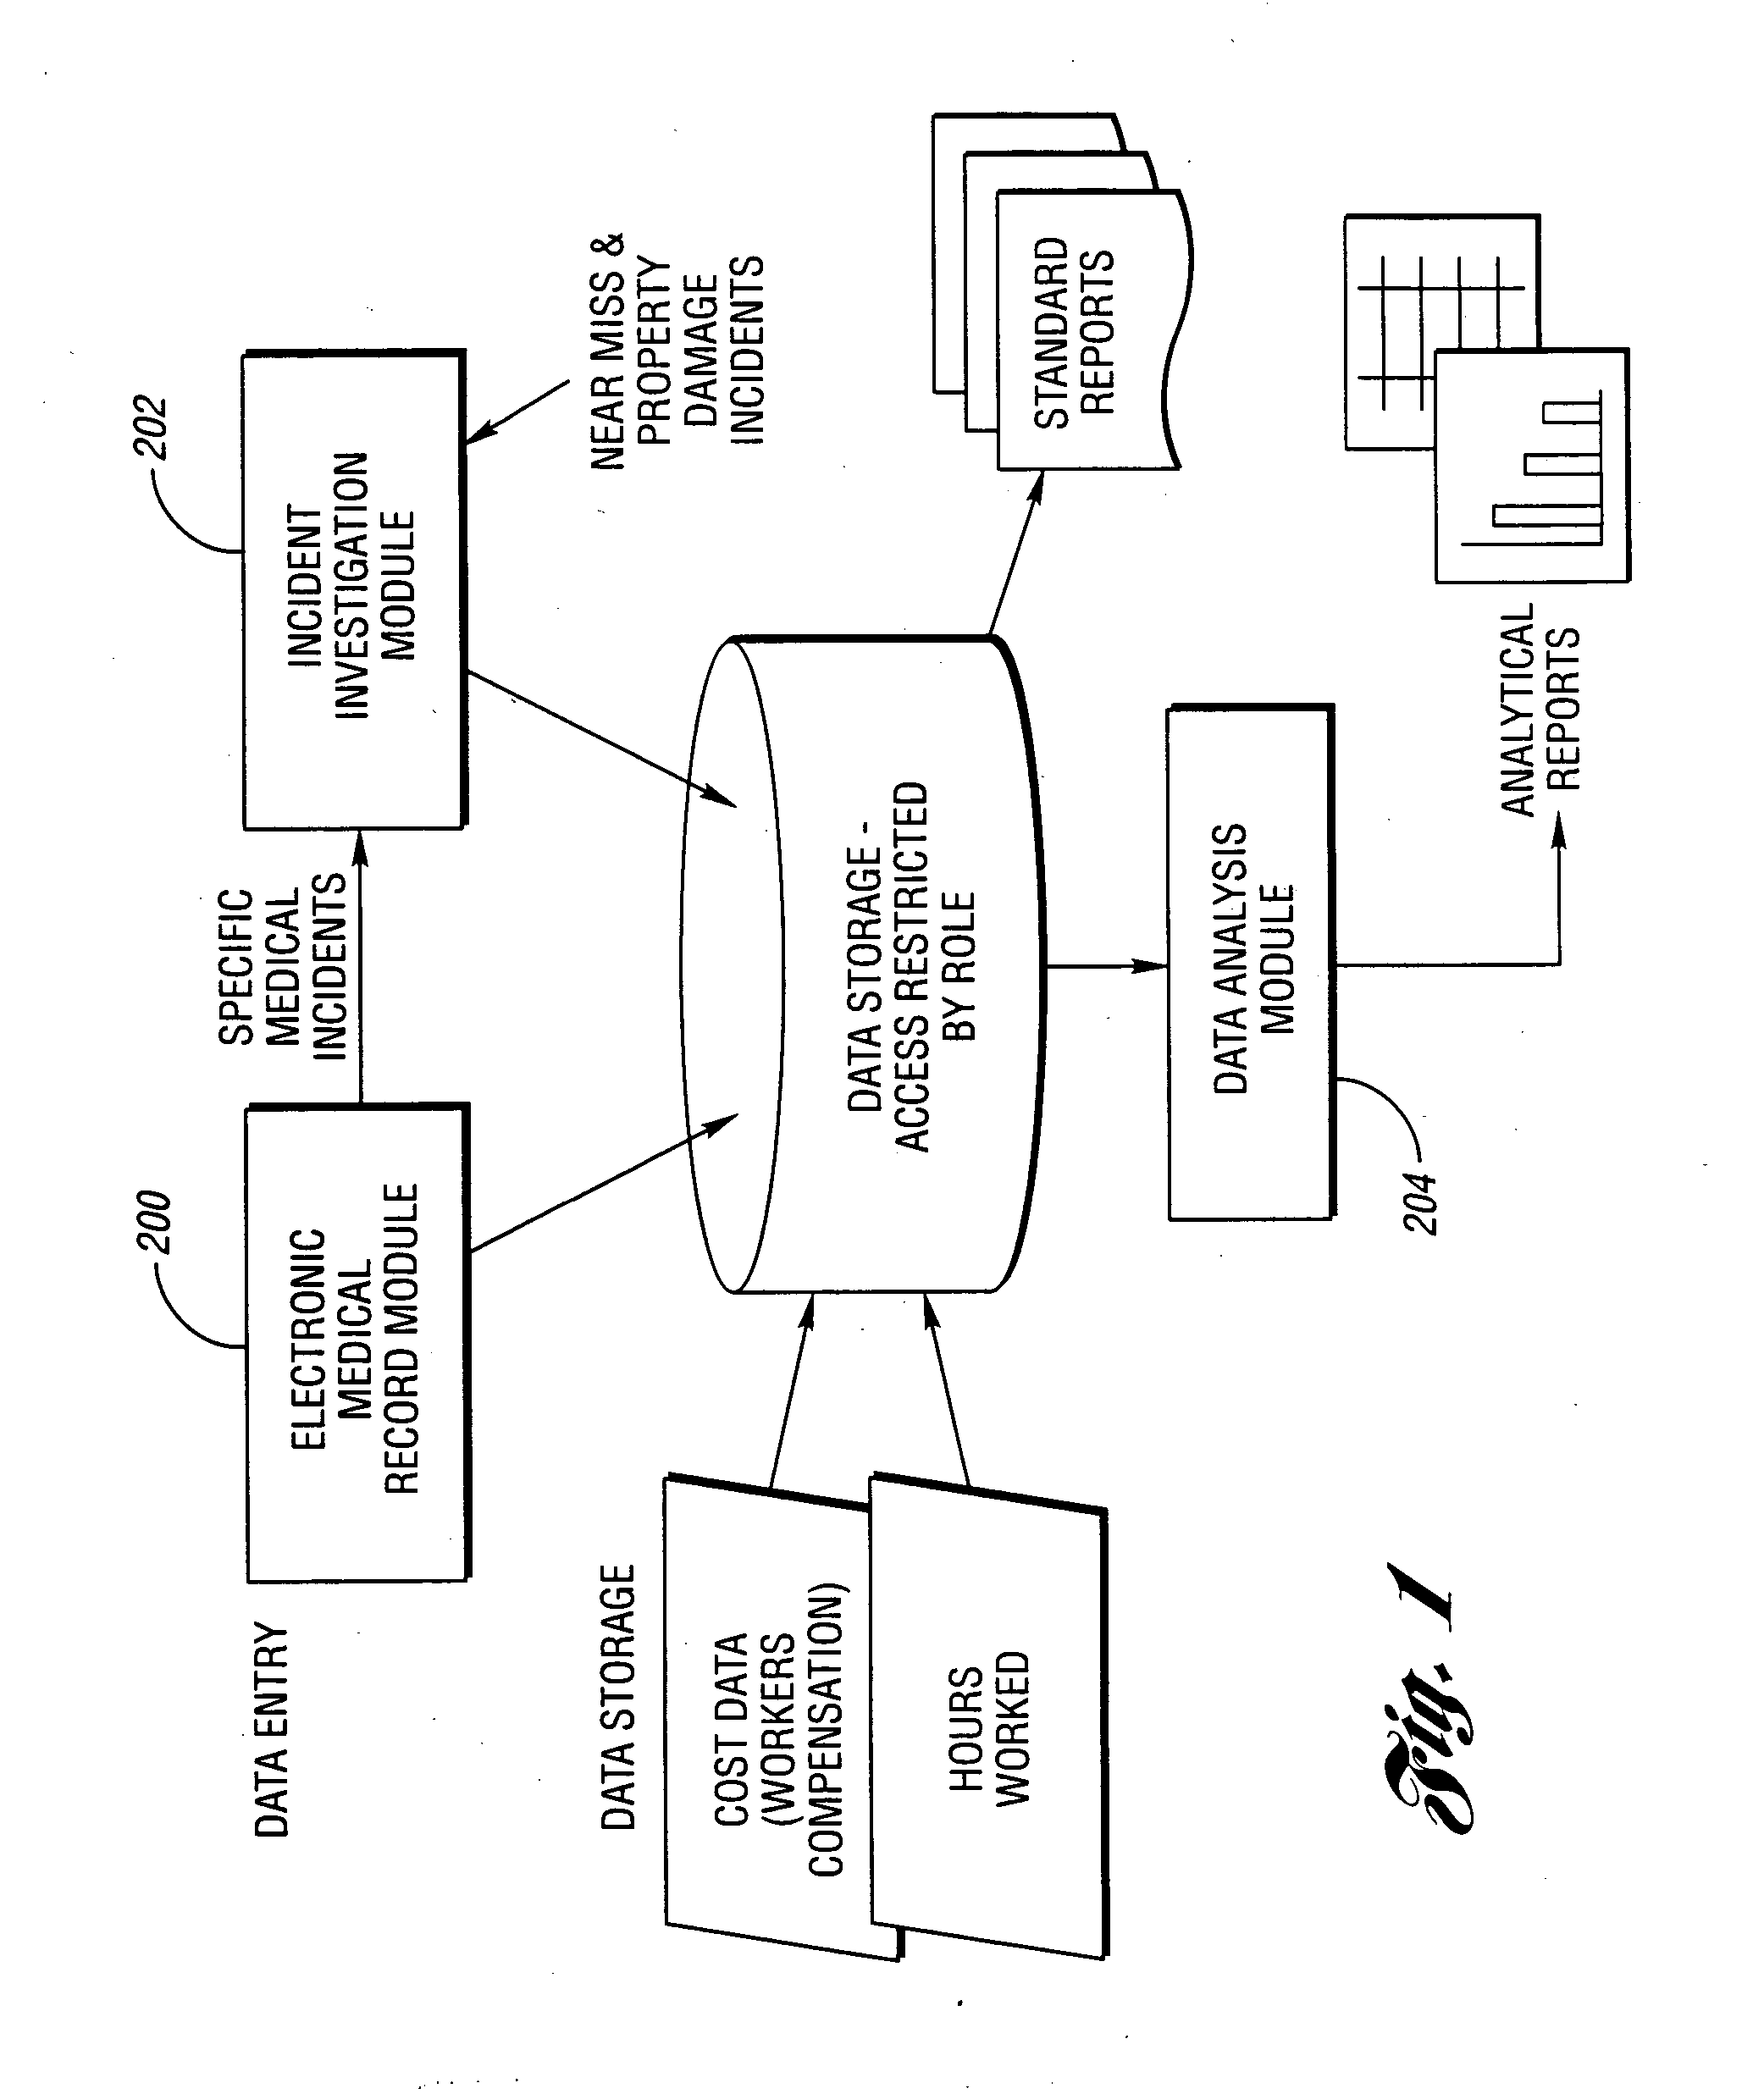 Method and system for automating occupational health and safety information management